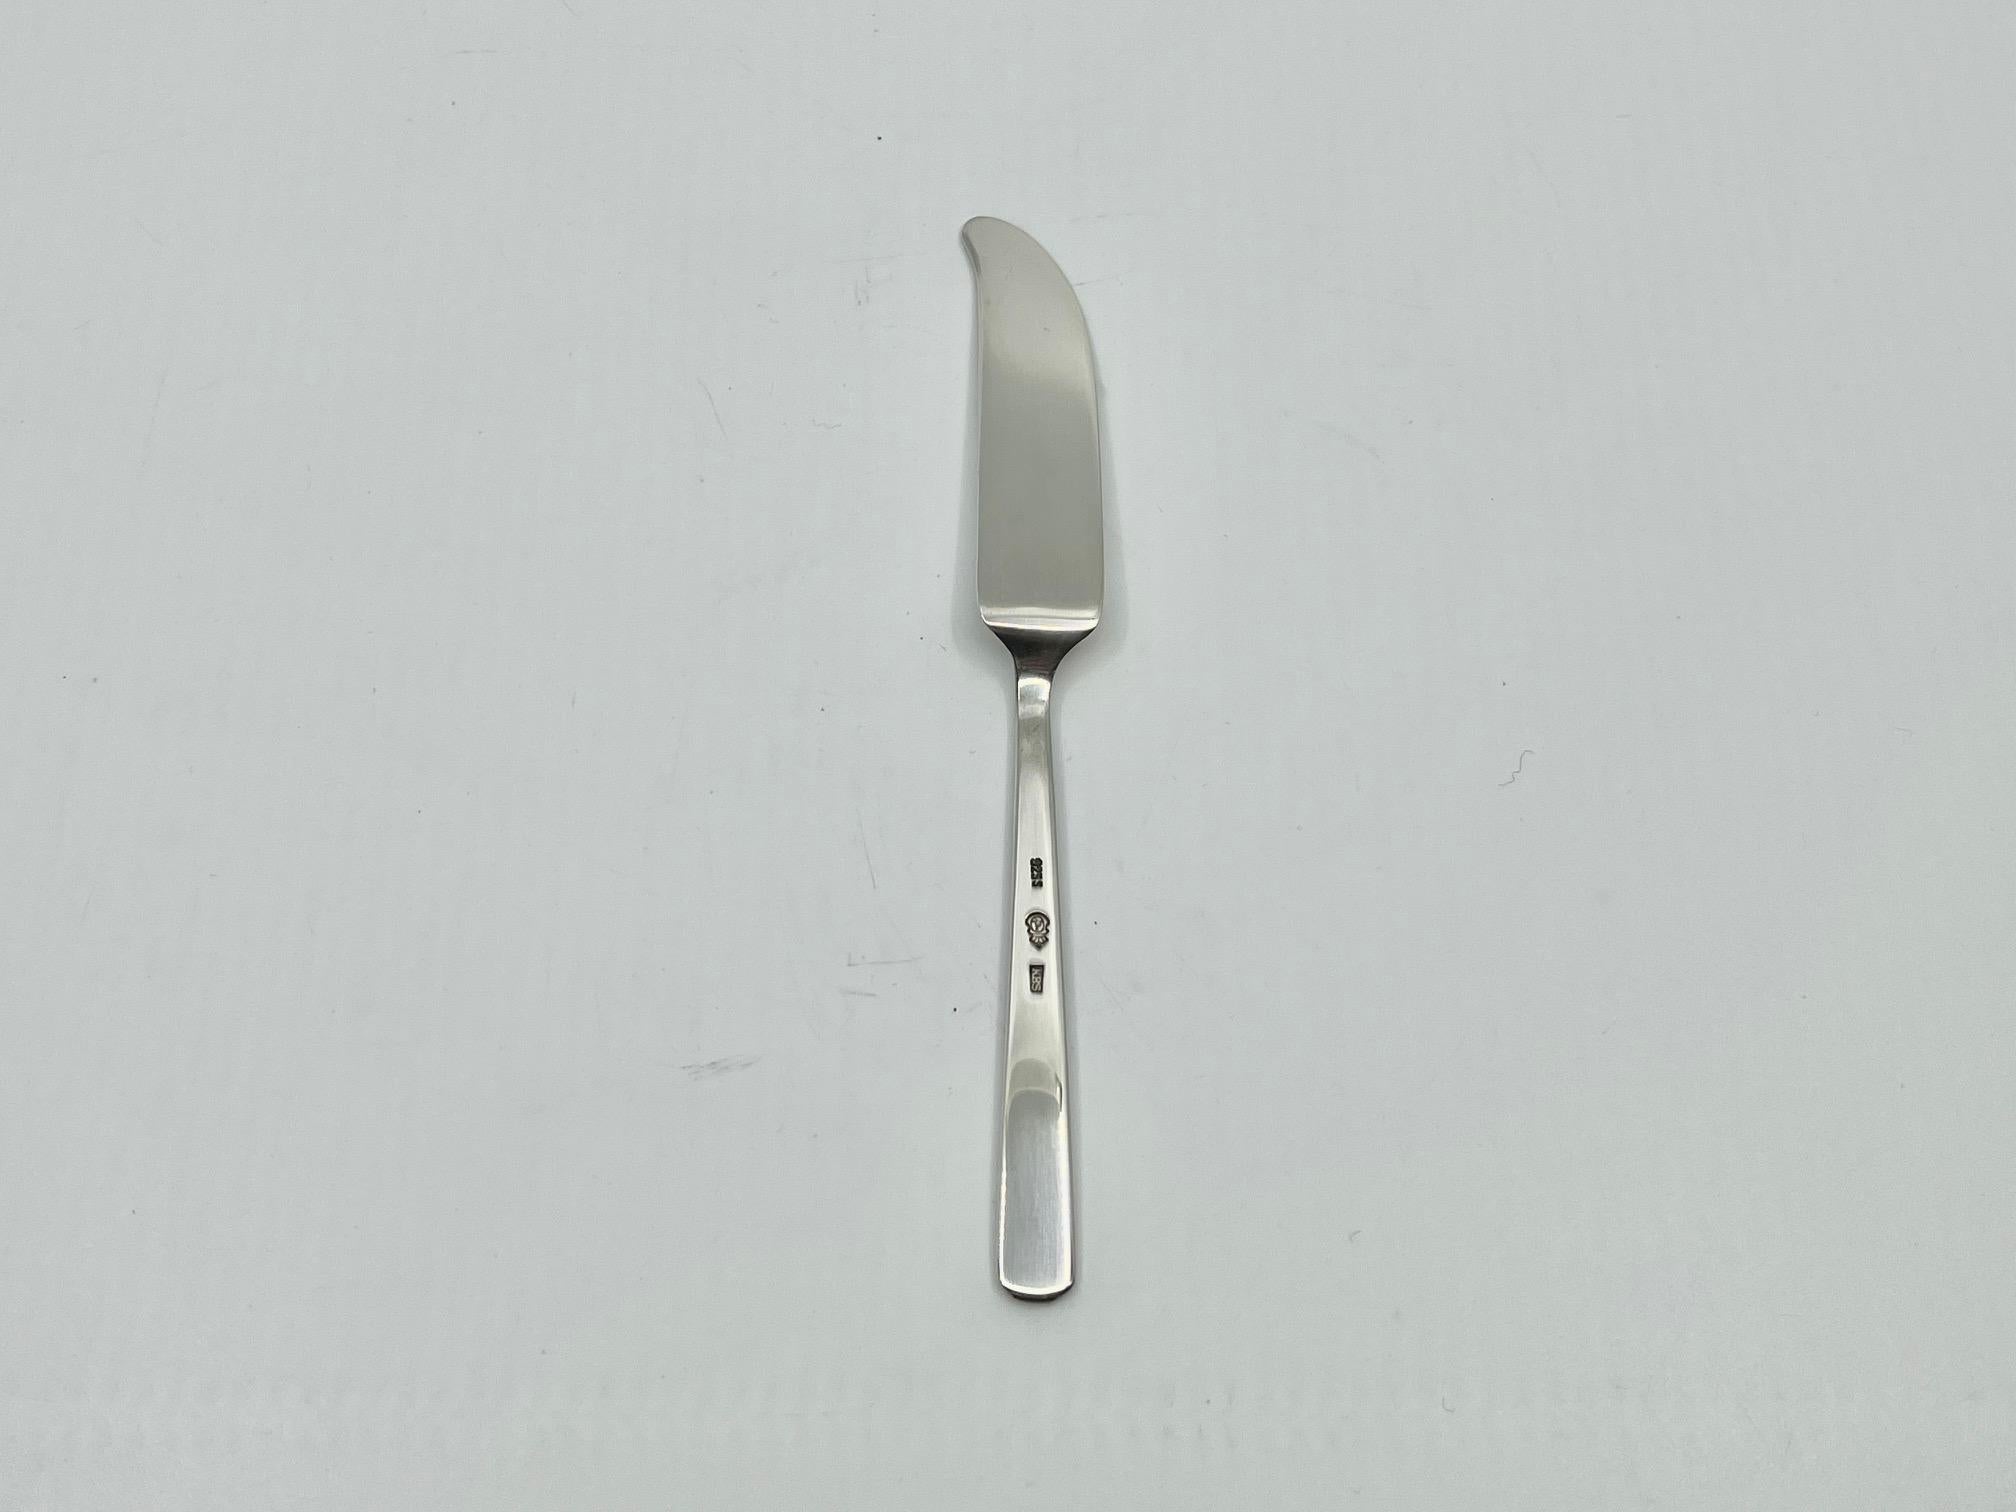 A sterling silver curved butter knife in the Grand Prix pattern, designed by Kay Bojesen in 1938.

Additional information:
Material: Sterling silver
Styles: Modern
Hallmarks: Marked with the Kay Bojesen buoy logo and “925S KBS”.
Dimensions: Measures